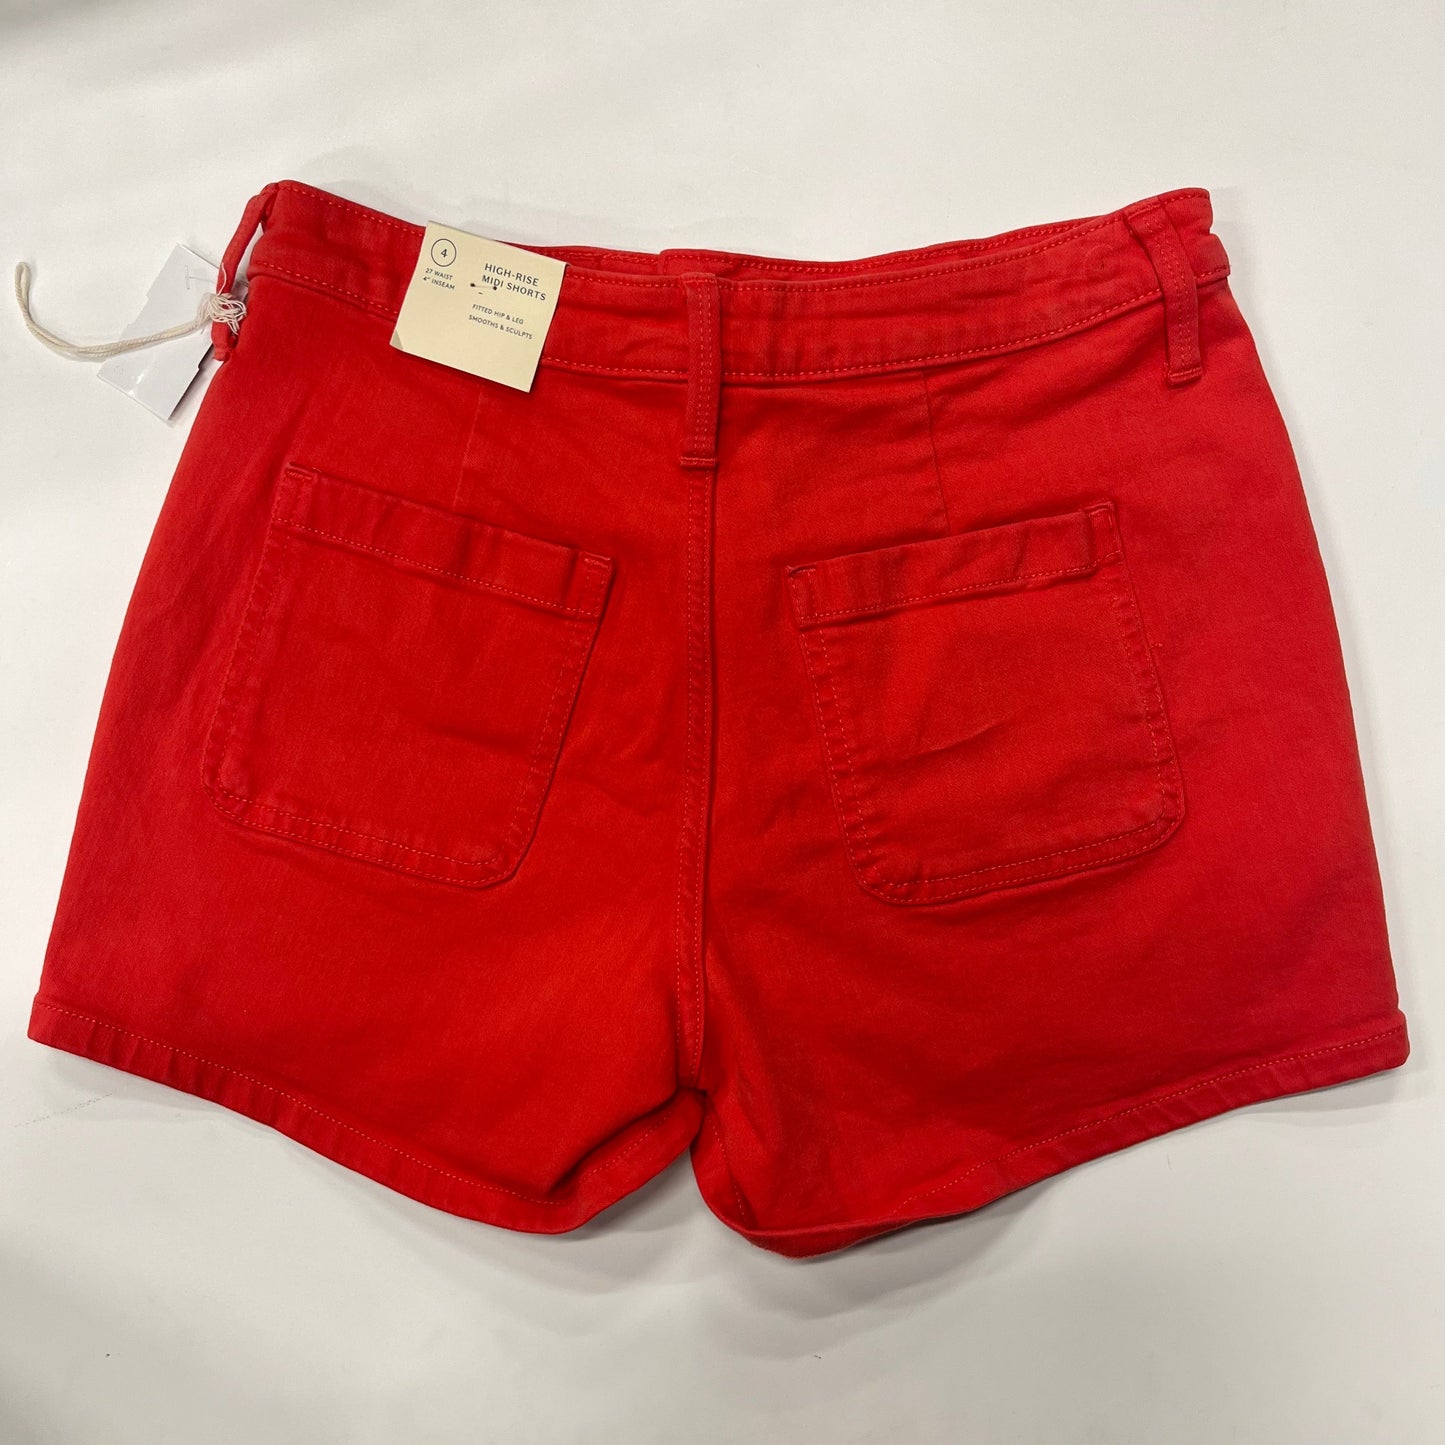 Shorts By Universal Thread NWT Size: 4